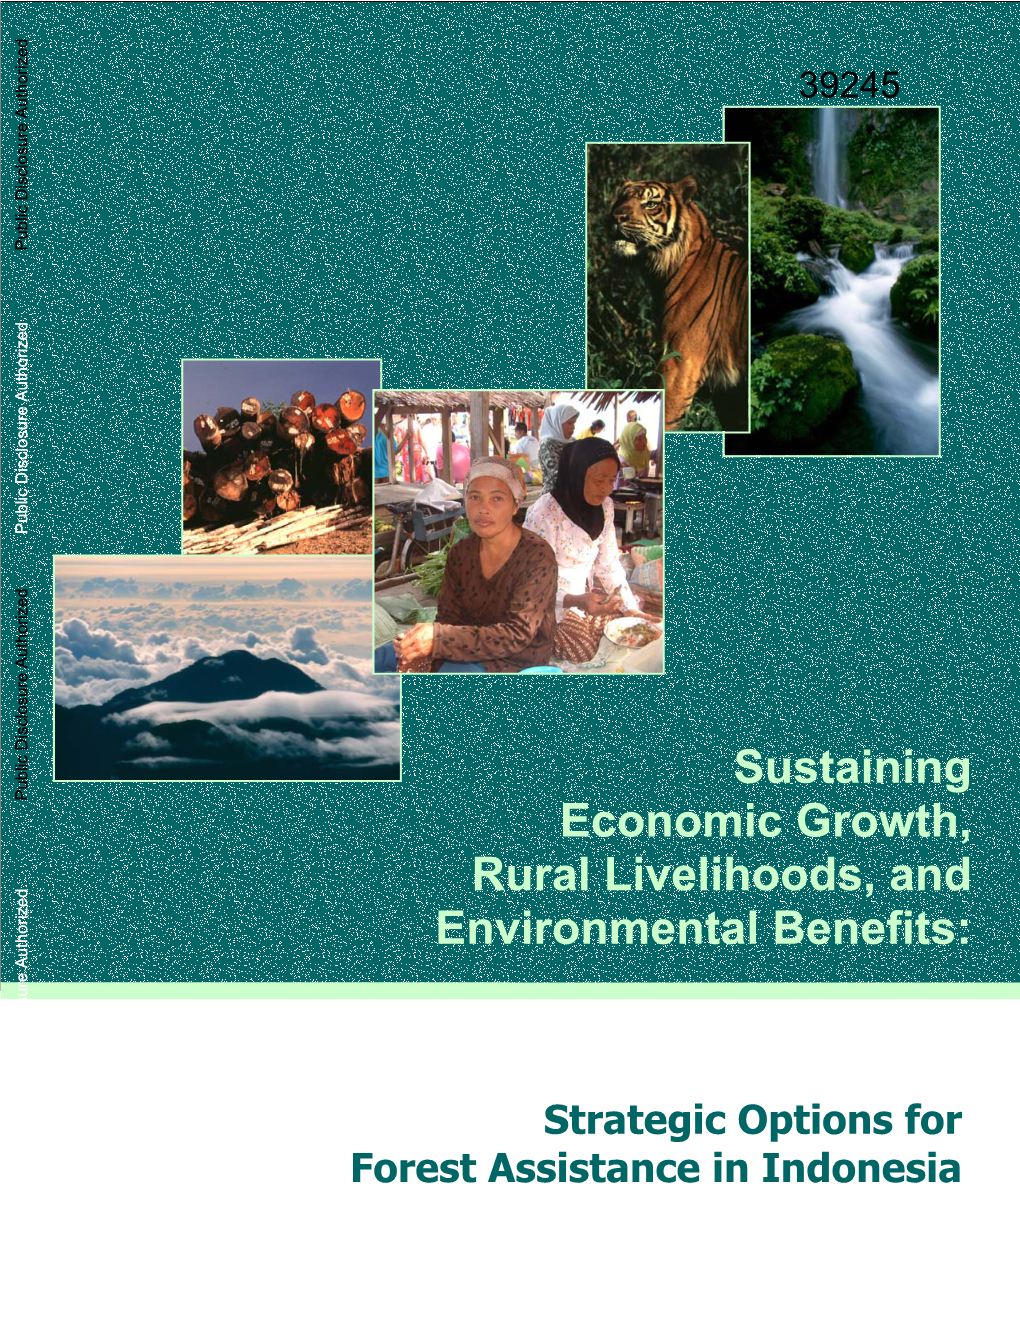 Donor Assistance to Indonesian Forestry Sector: 1985-2004 A-21 Annex C: Key Elements of Dept